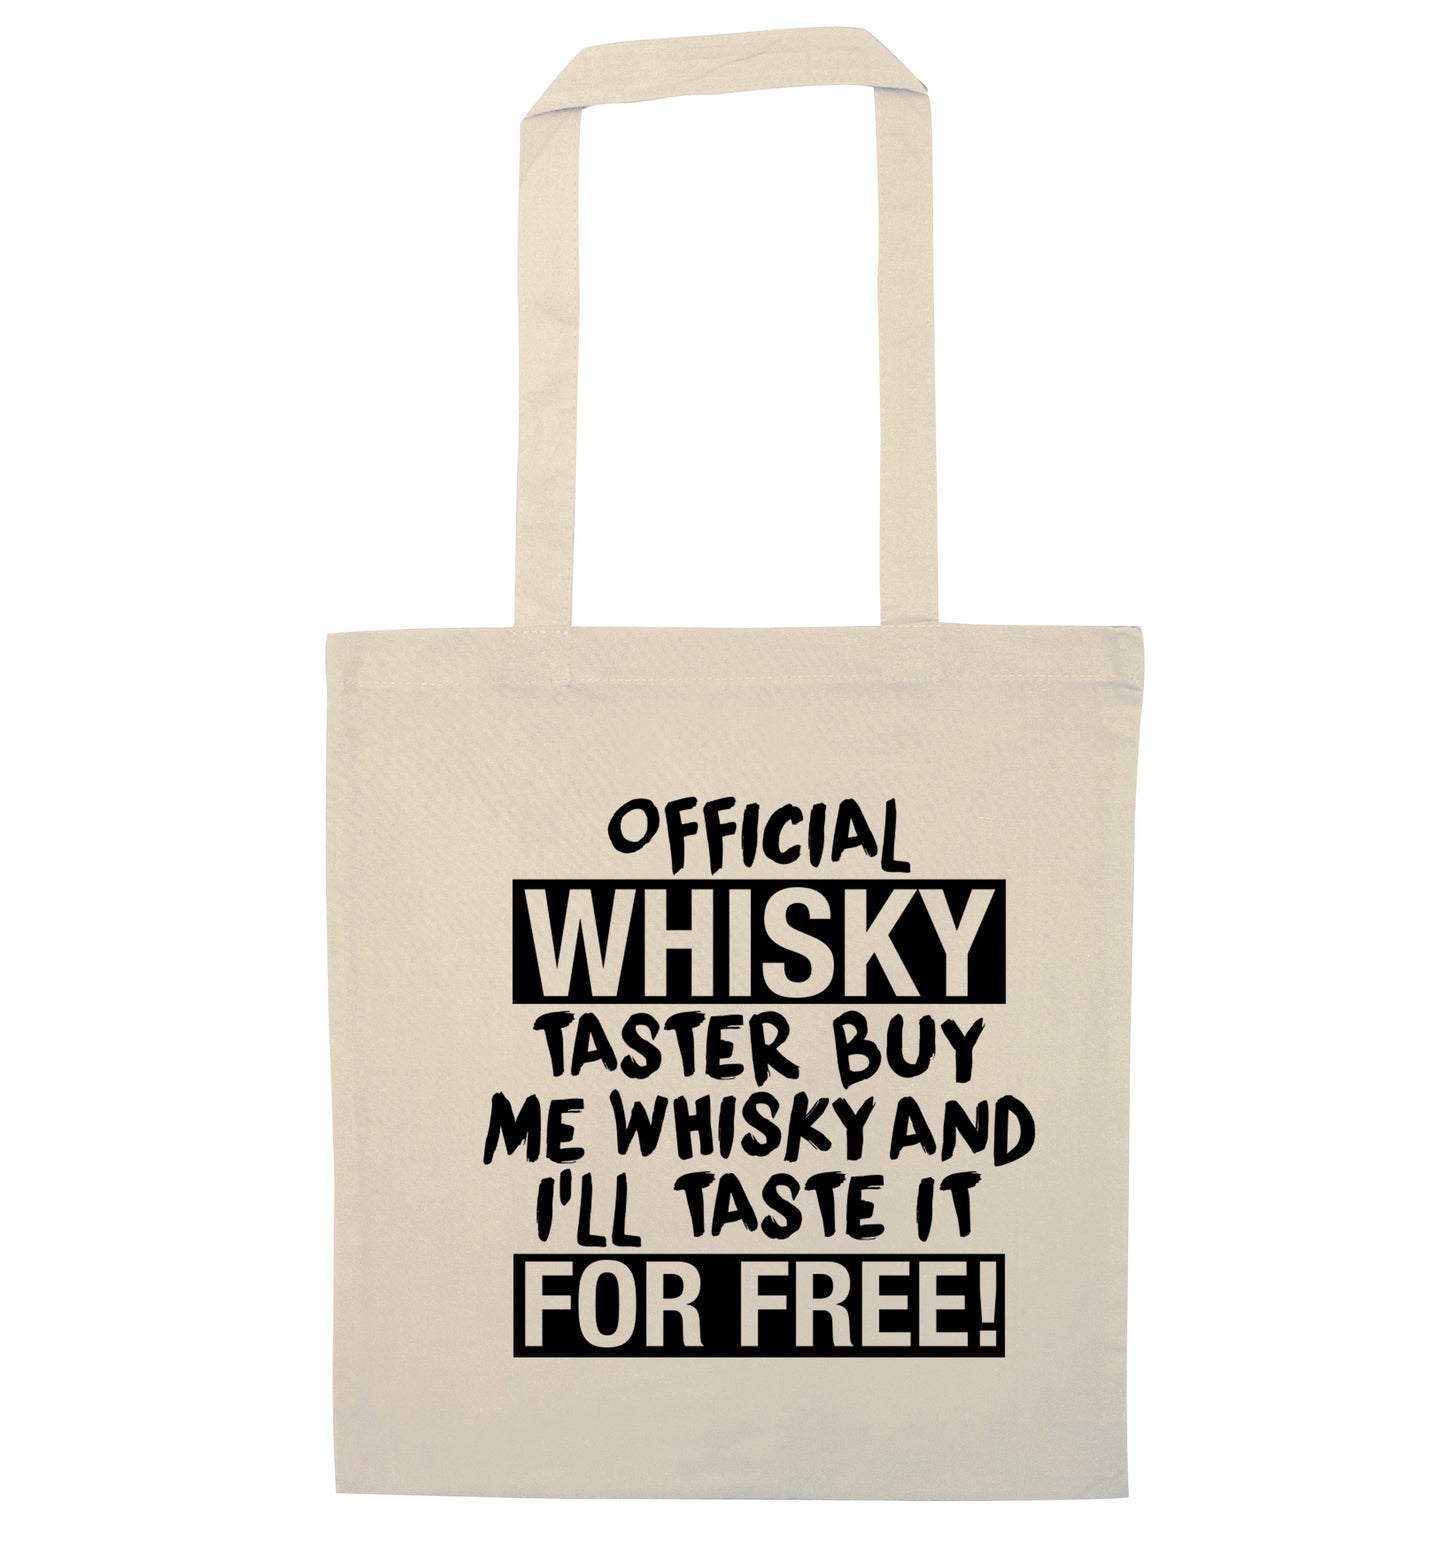 Official whisky taster buy me whisky and I'll taste it for free natural tote bag